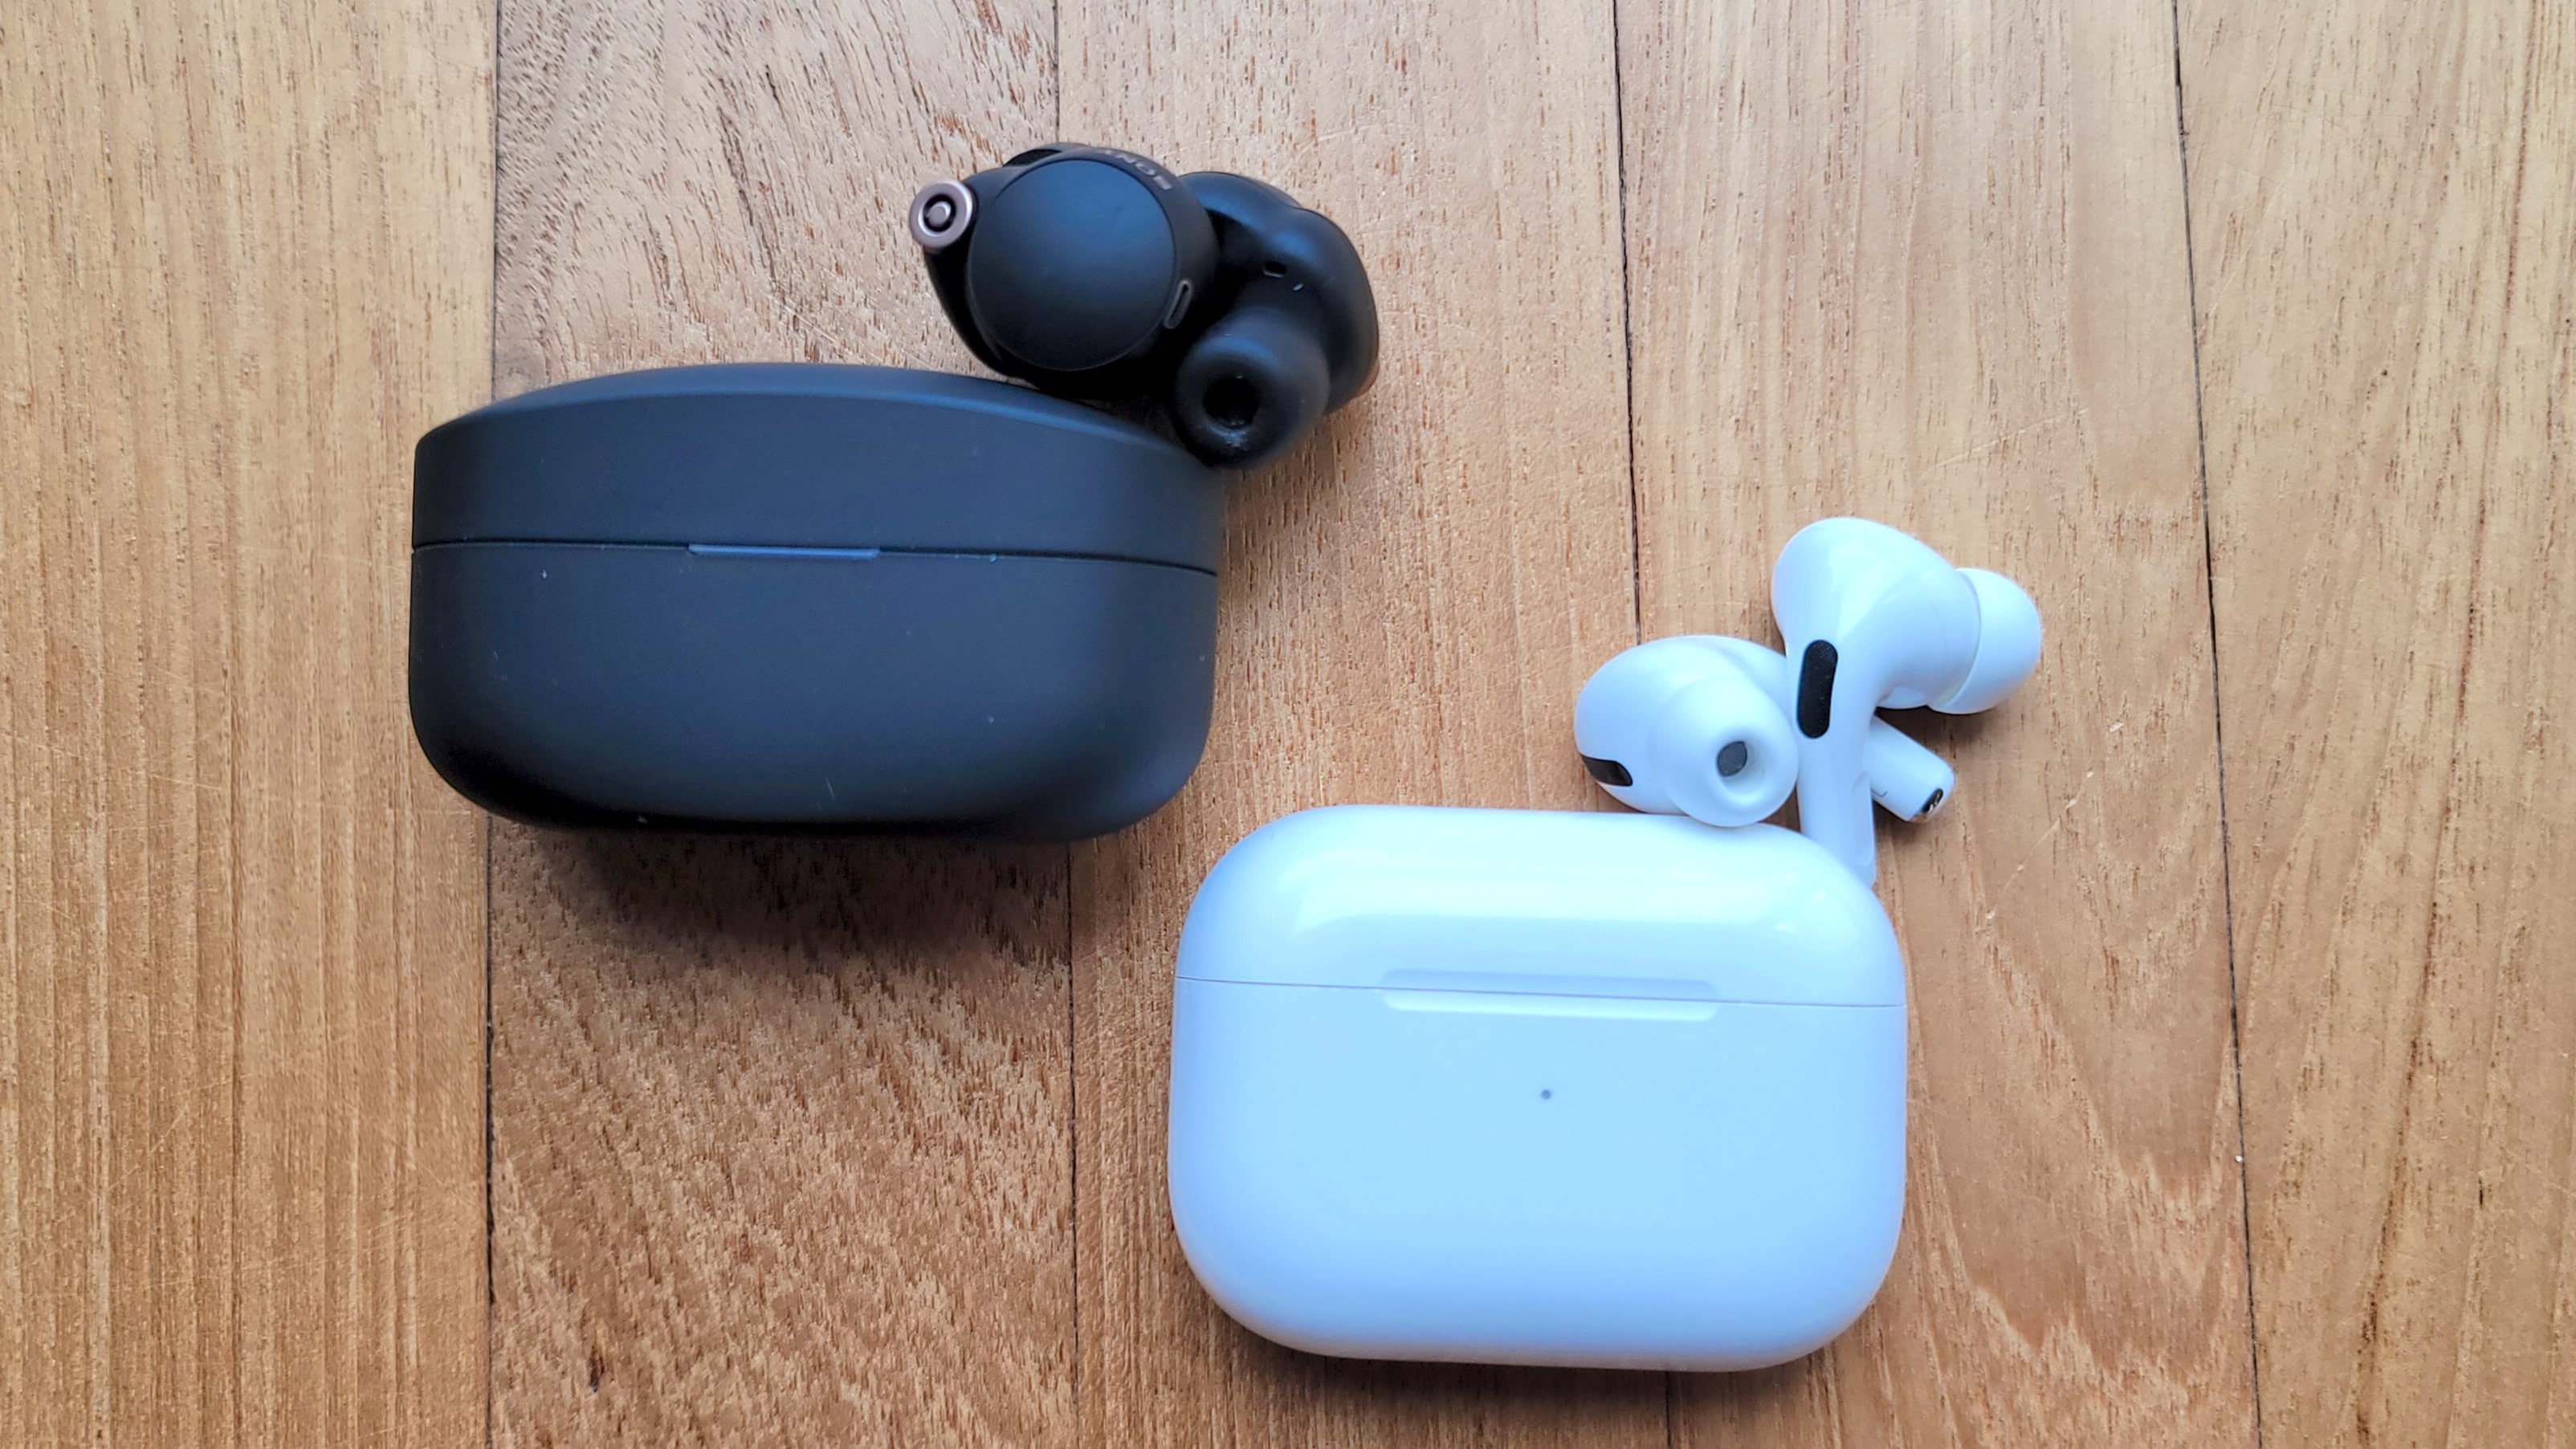 WF-1000XM4 vs. AirPods Pro: Which noise-cancelling earbuds win? | Tom's